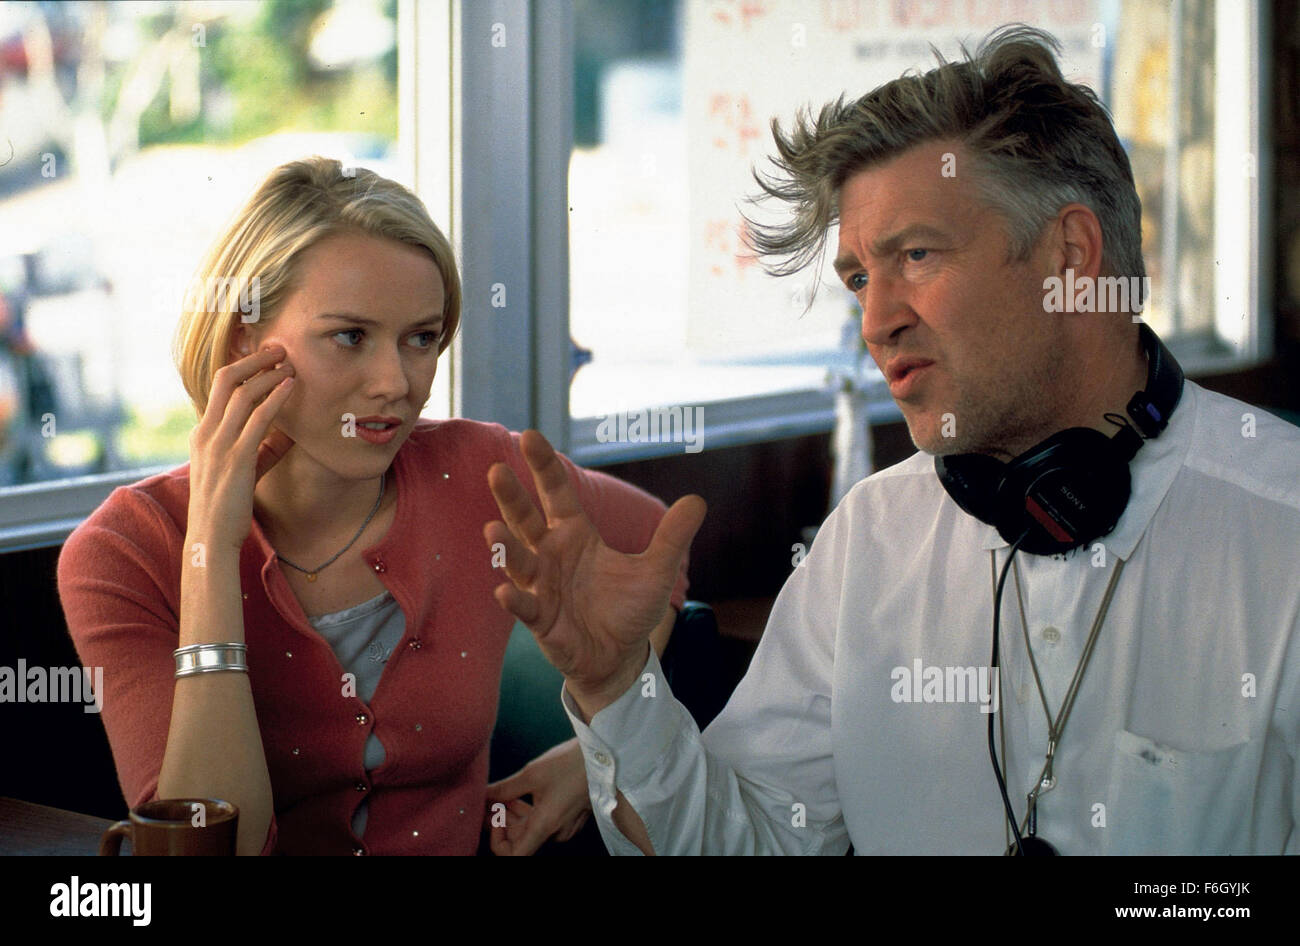 Nov 04, 2001; Hollywood, CA, USA; Image of director DAVID LYNCH on the set of his drama mystery 'Mulholland Dr.' with star NAOMI WATTS who plays Betty Elms/Diane Selwyn. Stock Photo